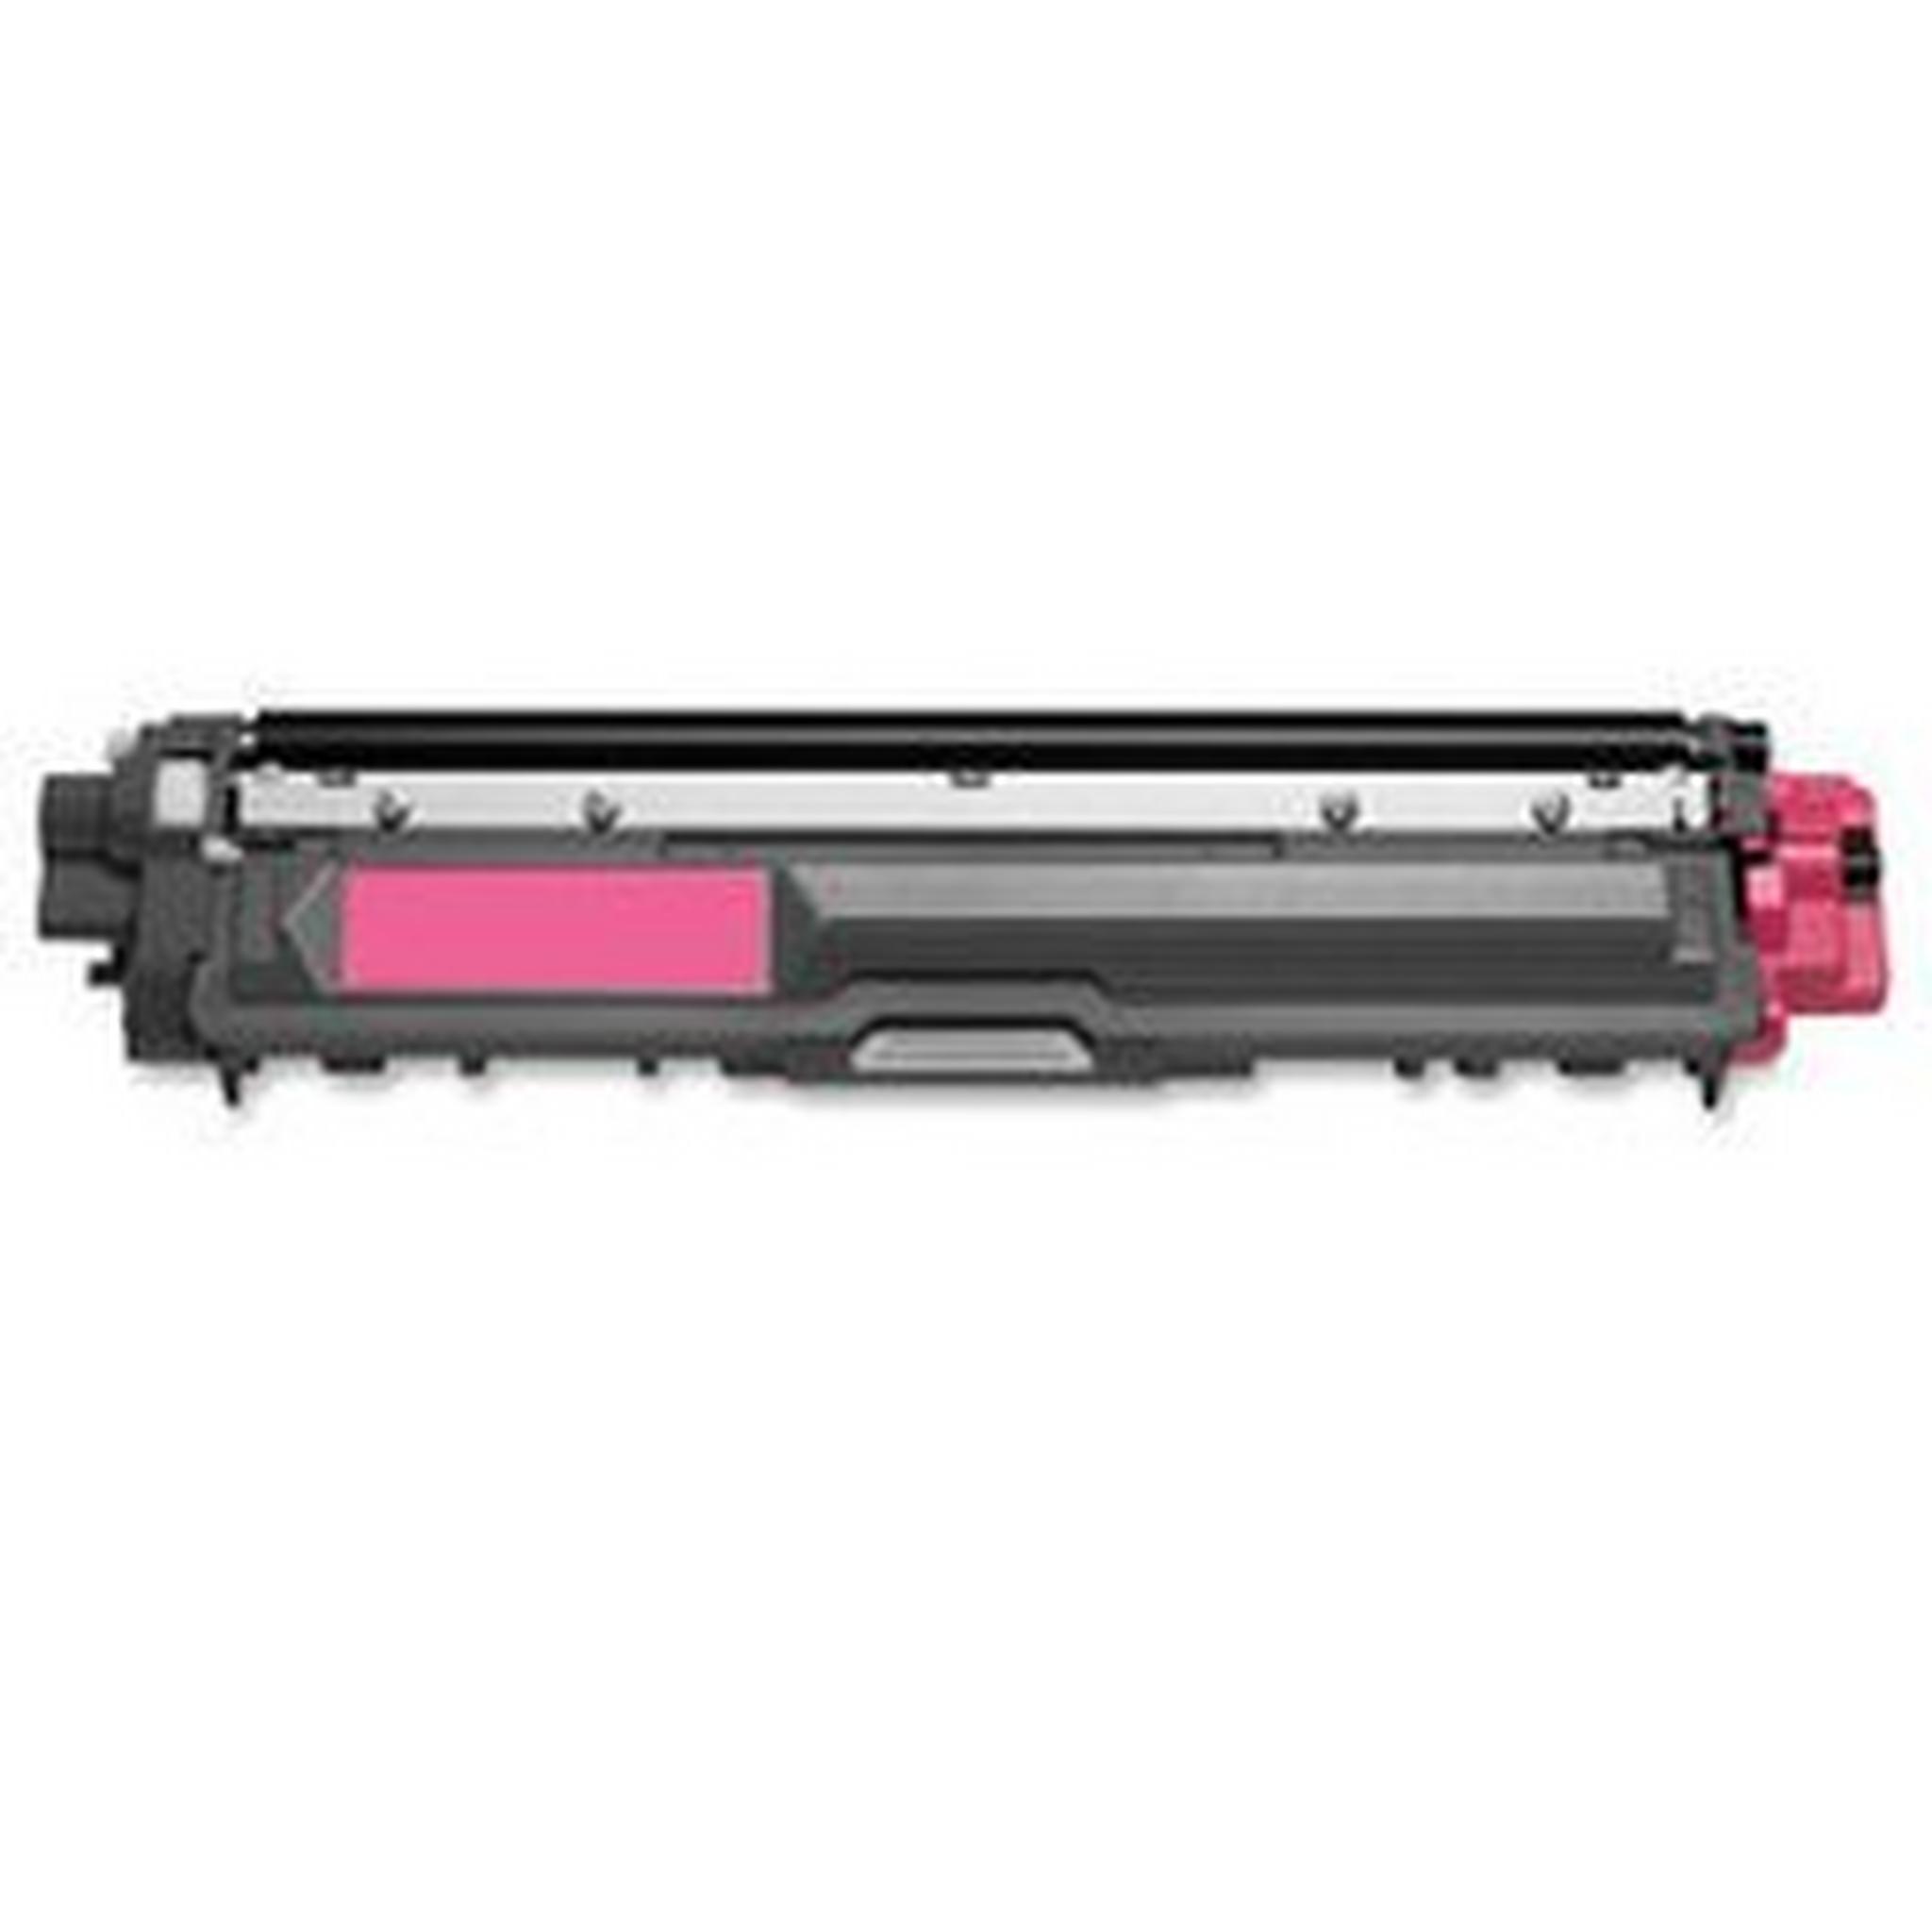 BROTHER Toner TN261M for LaserJet Printing 1400 Page Yield - Magenta (Single Colour Pack)